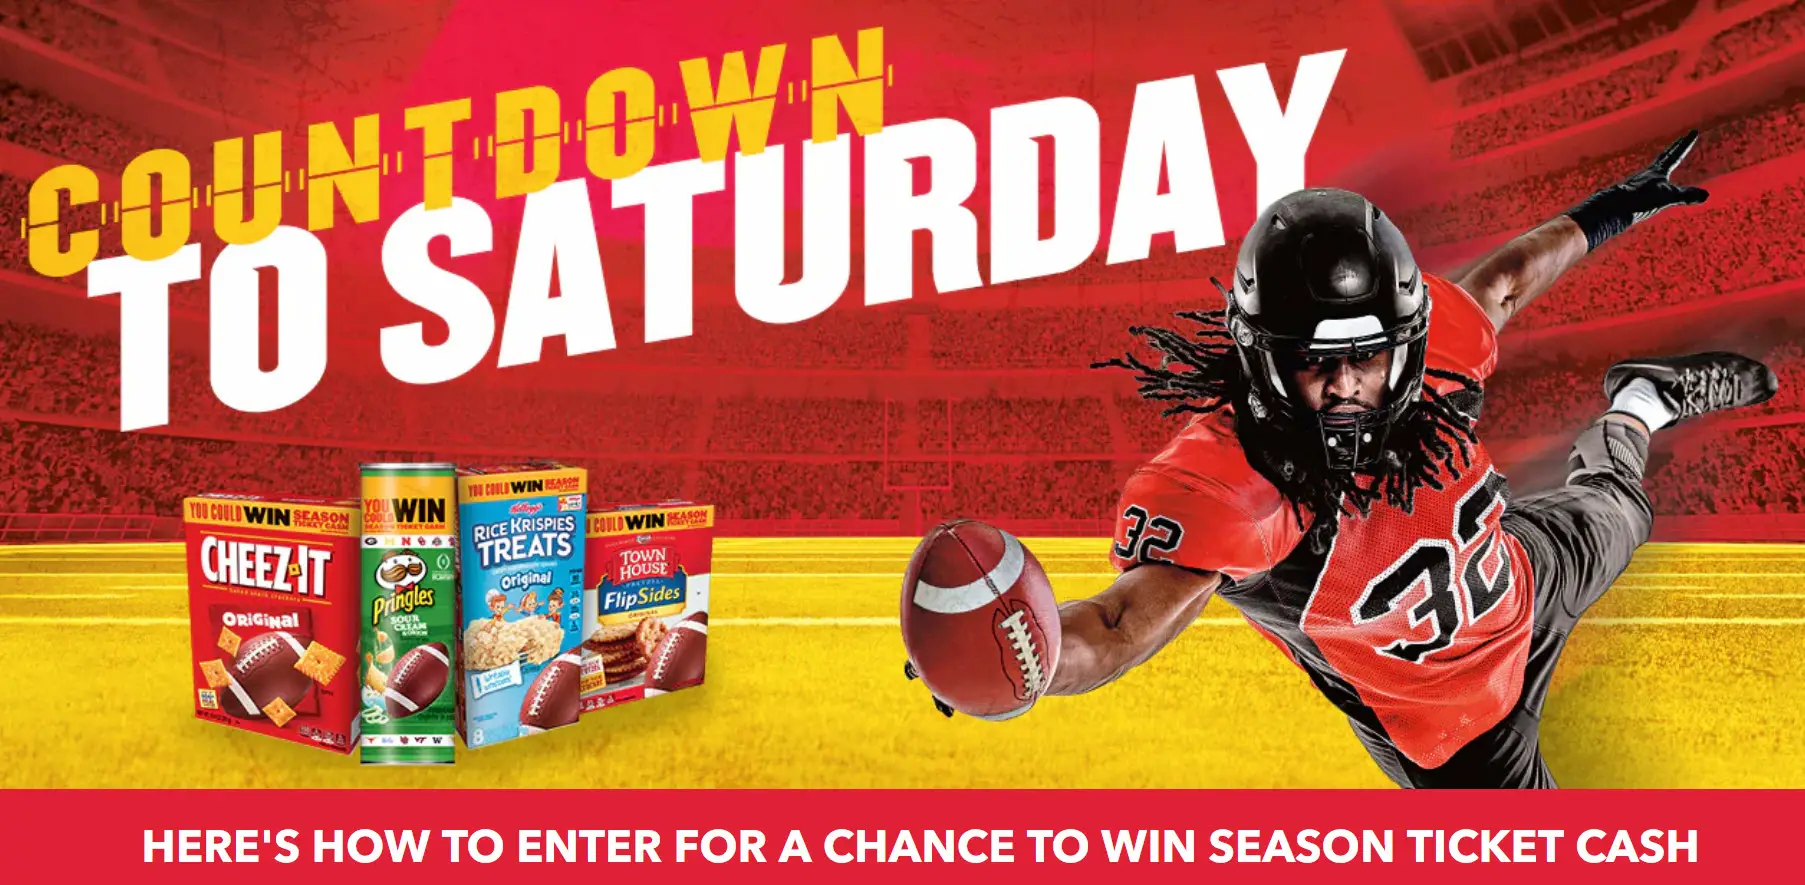 221 CASH WINNERS! Enter for your chance to win season ticket cash from the Kellogg’s Countdown to Saturday Cash Sweepstakes. There will be 3 drawings and a total of 221 cash winner!